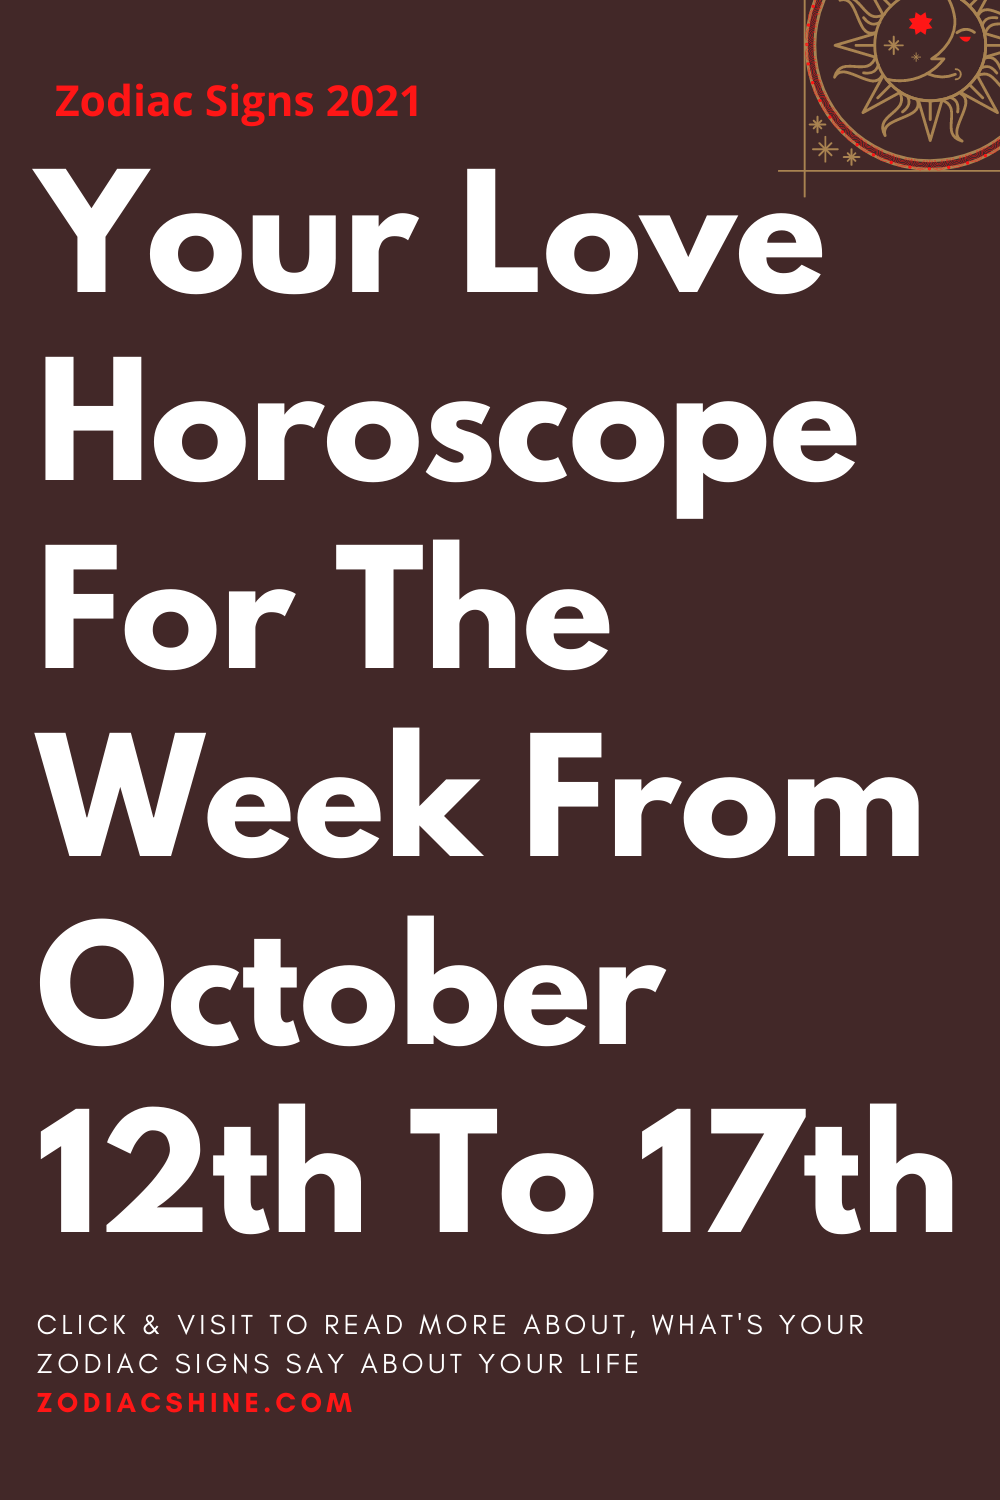 Your Love Horoscope For The Week From October 12th To 17th